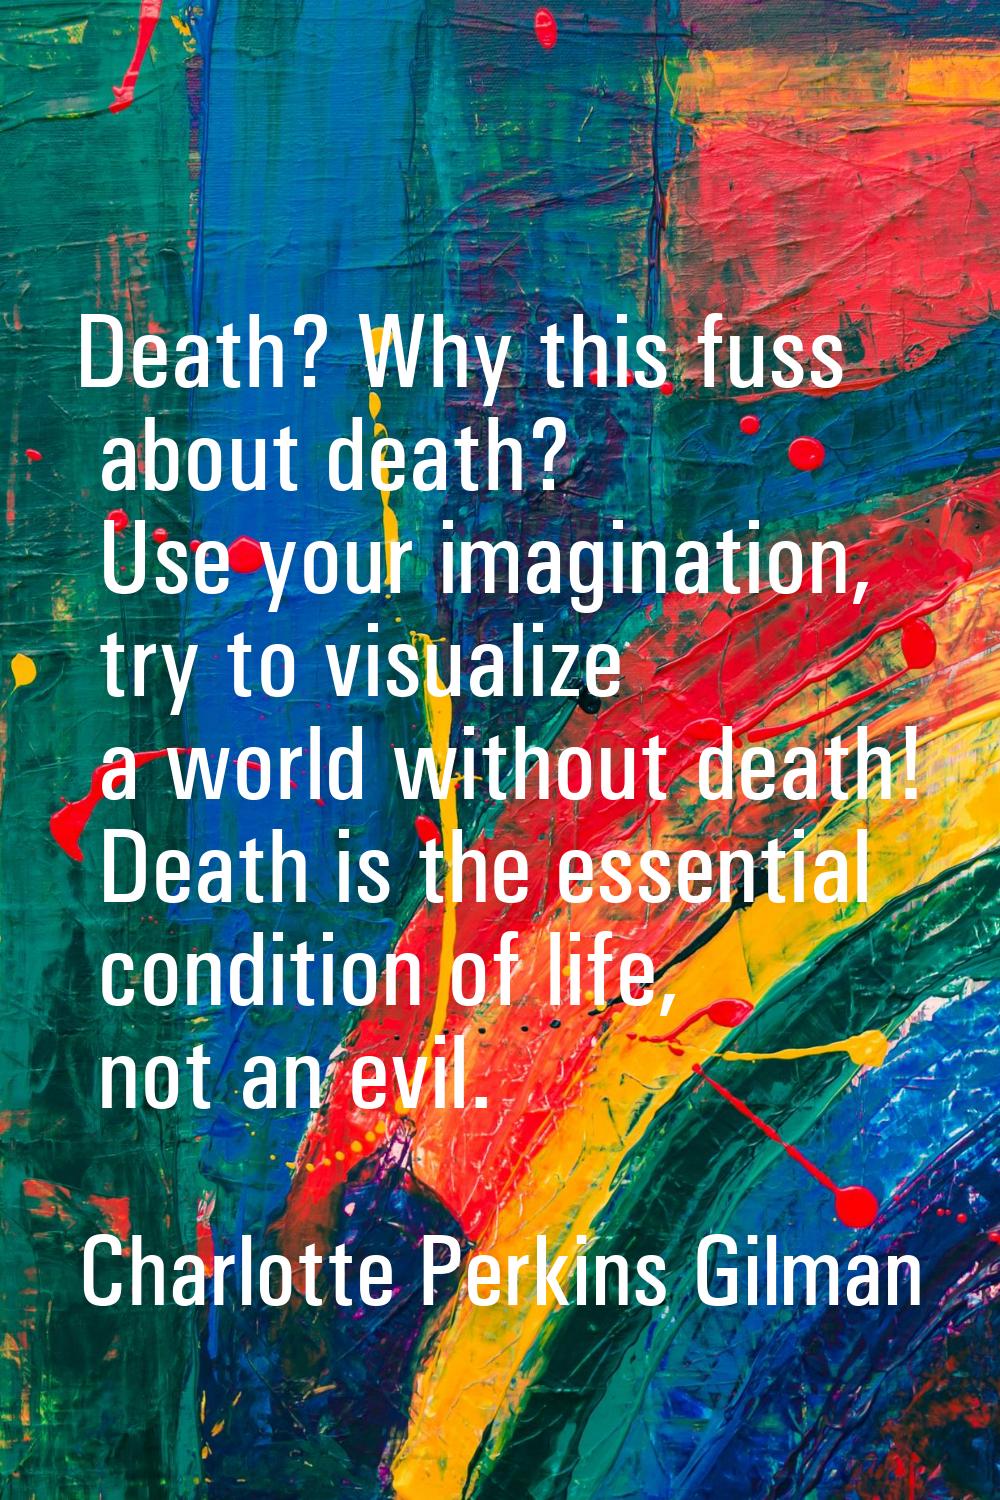 Death? Why this fuss about death? Use your imagination, try to visualize a world without death! Dea